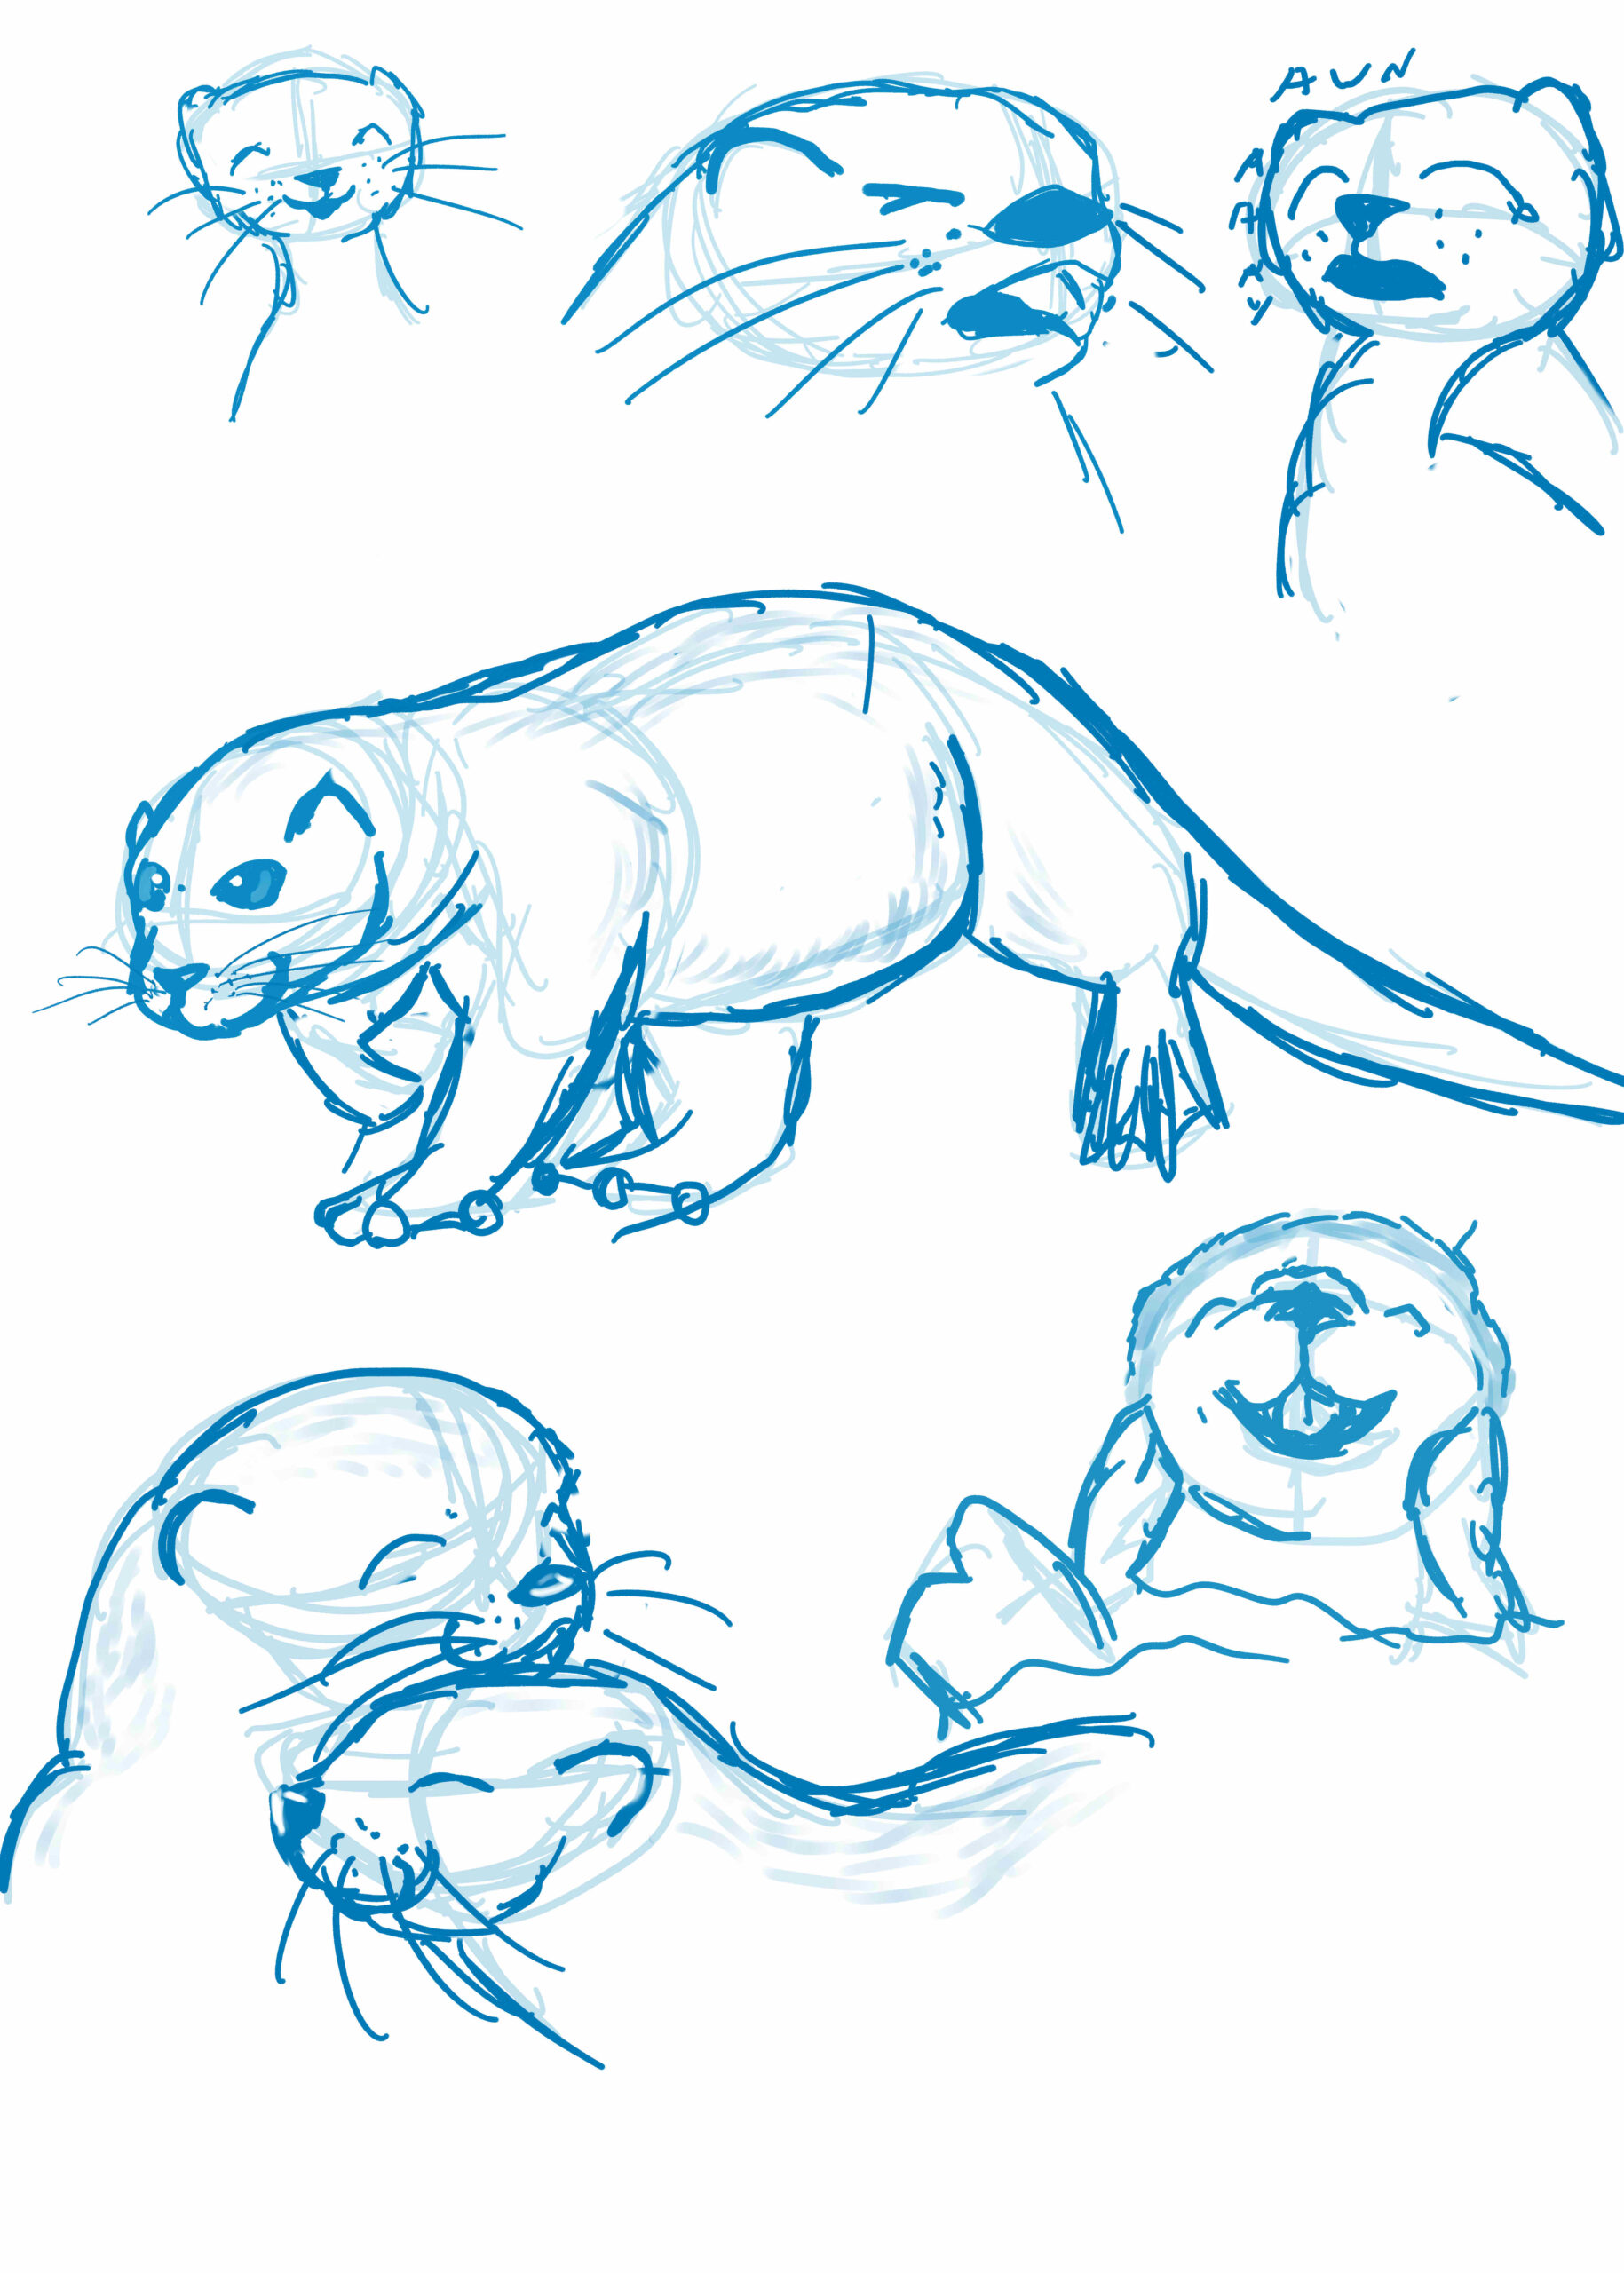 Howdy Imgur, here’s some otters I drew a while back for a chum.